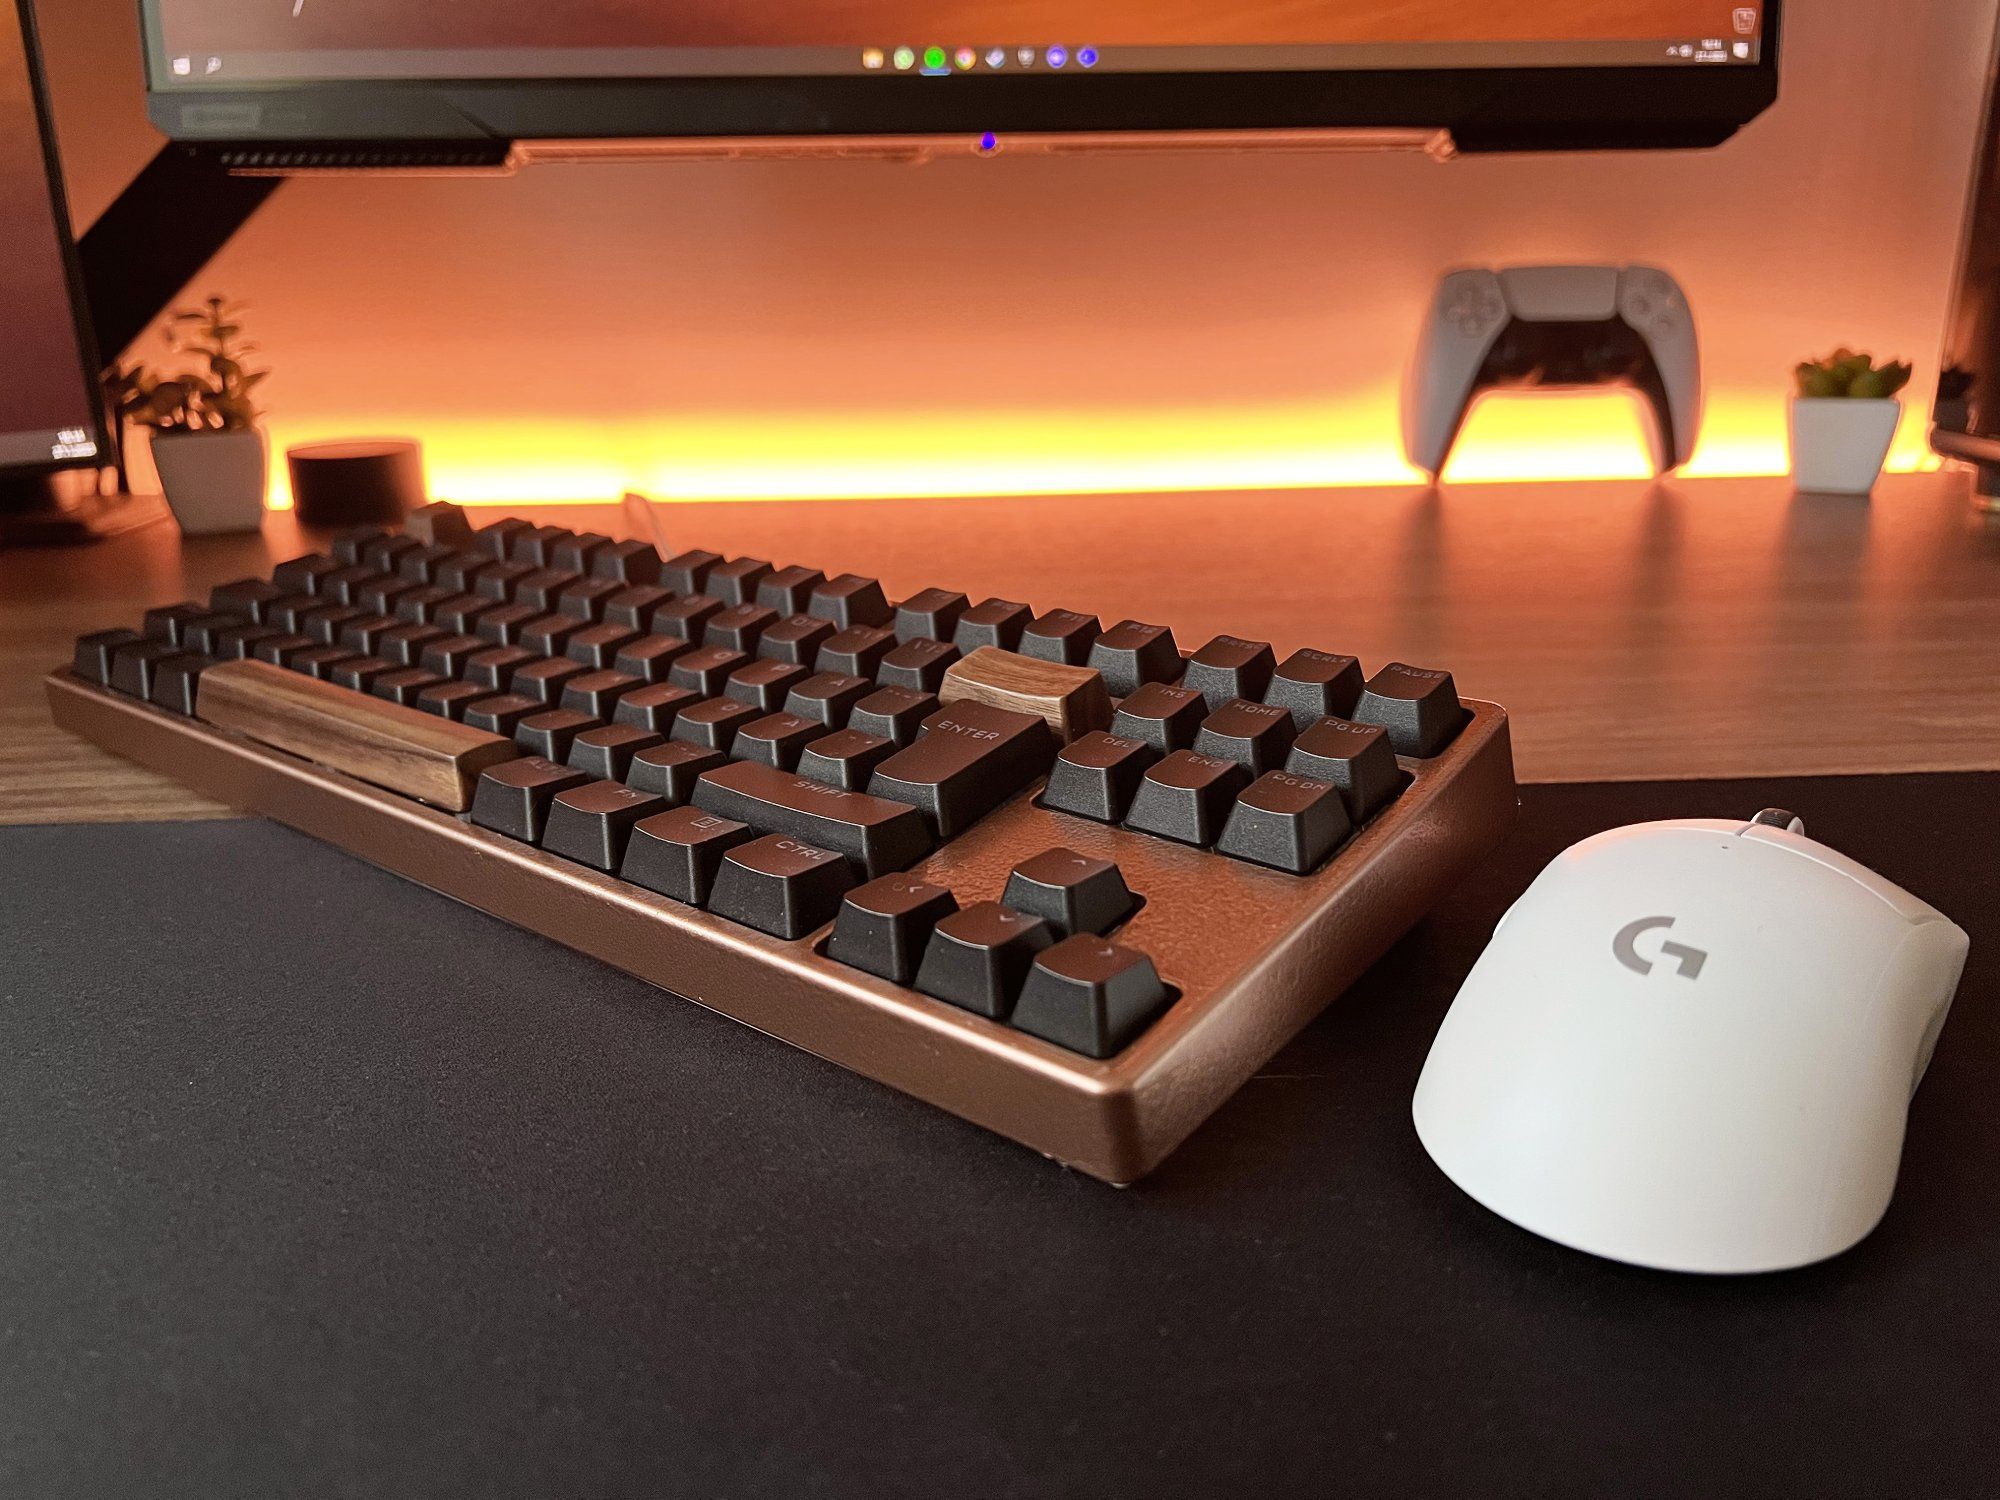 A Xtrfy K4 Tenkeyless with painted frame, custom keycaps and sound mods, and a Logitech G PRO X Superlight mouse